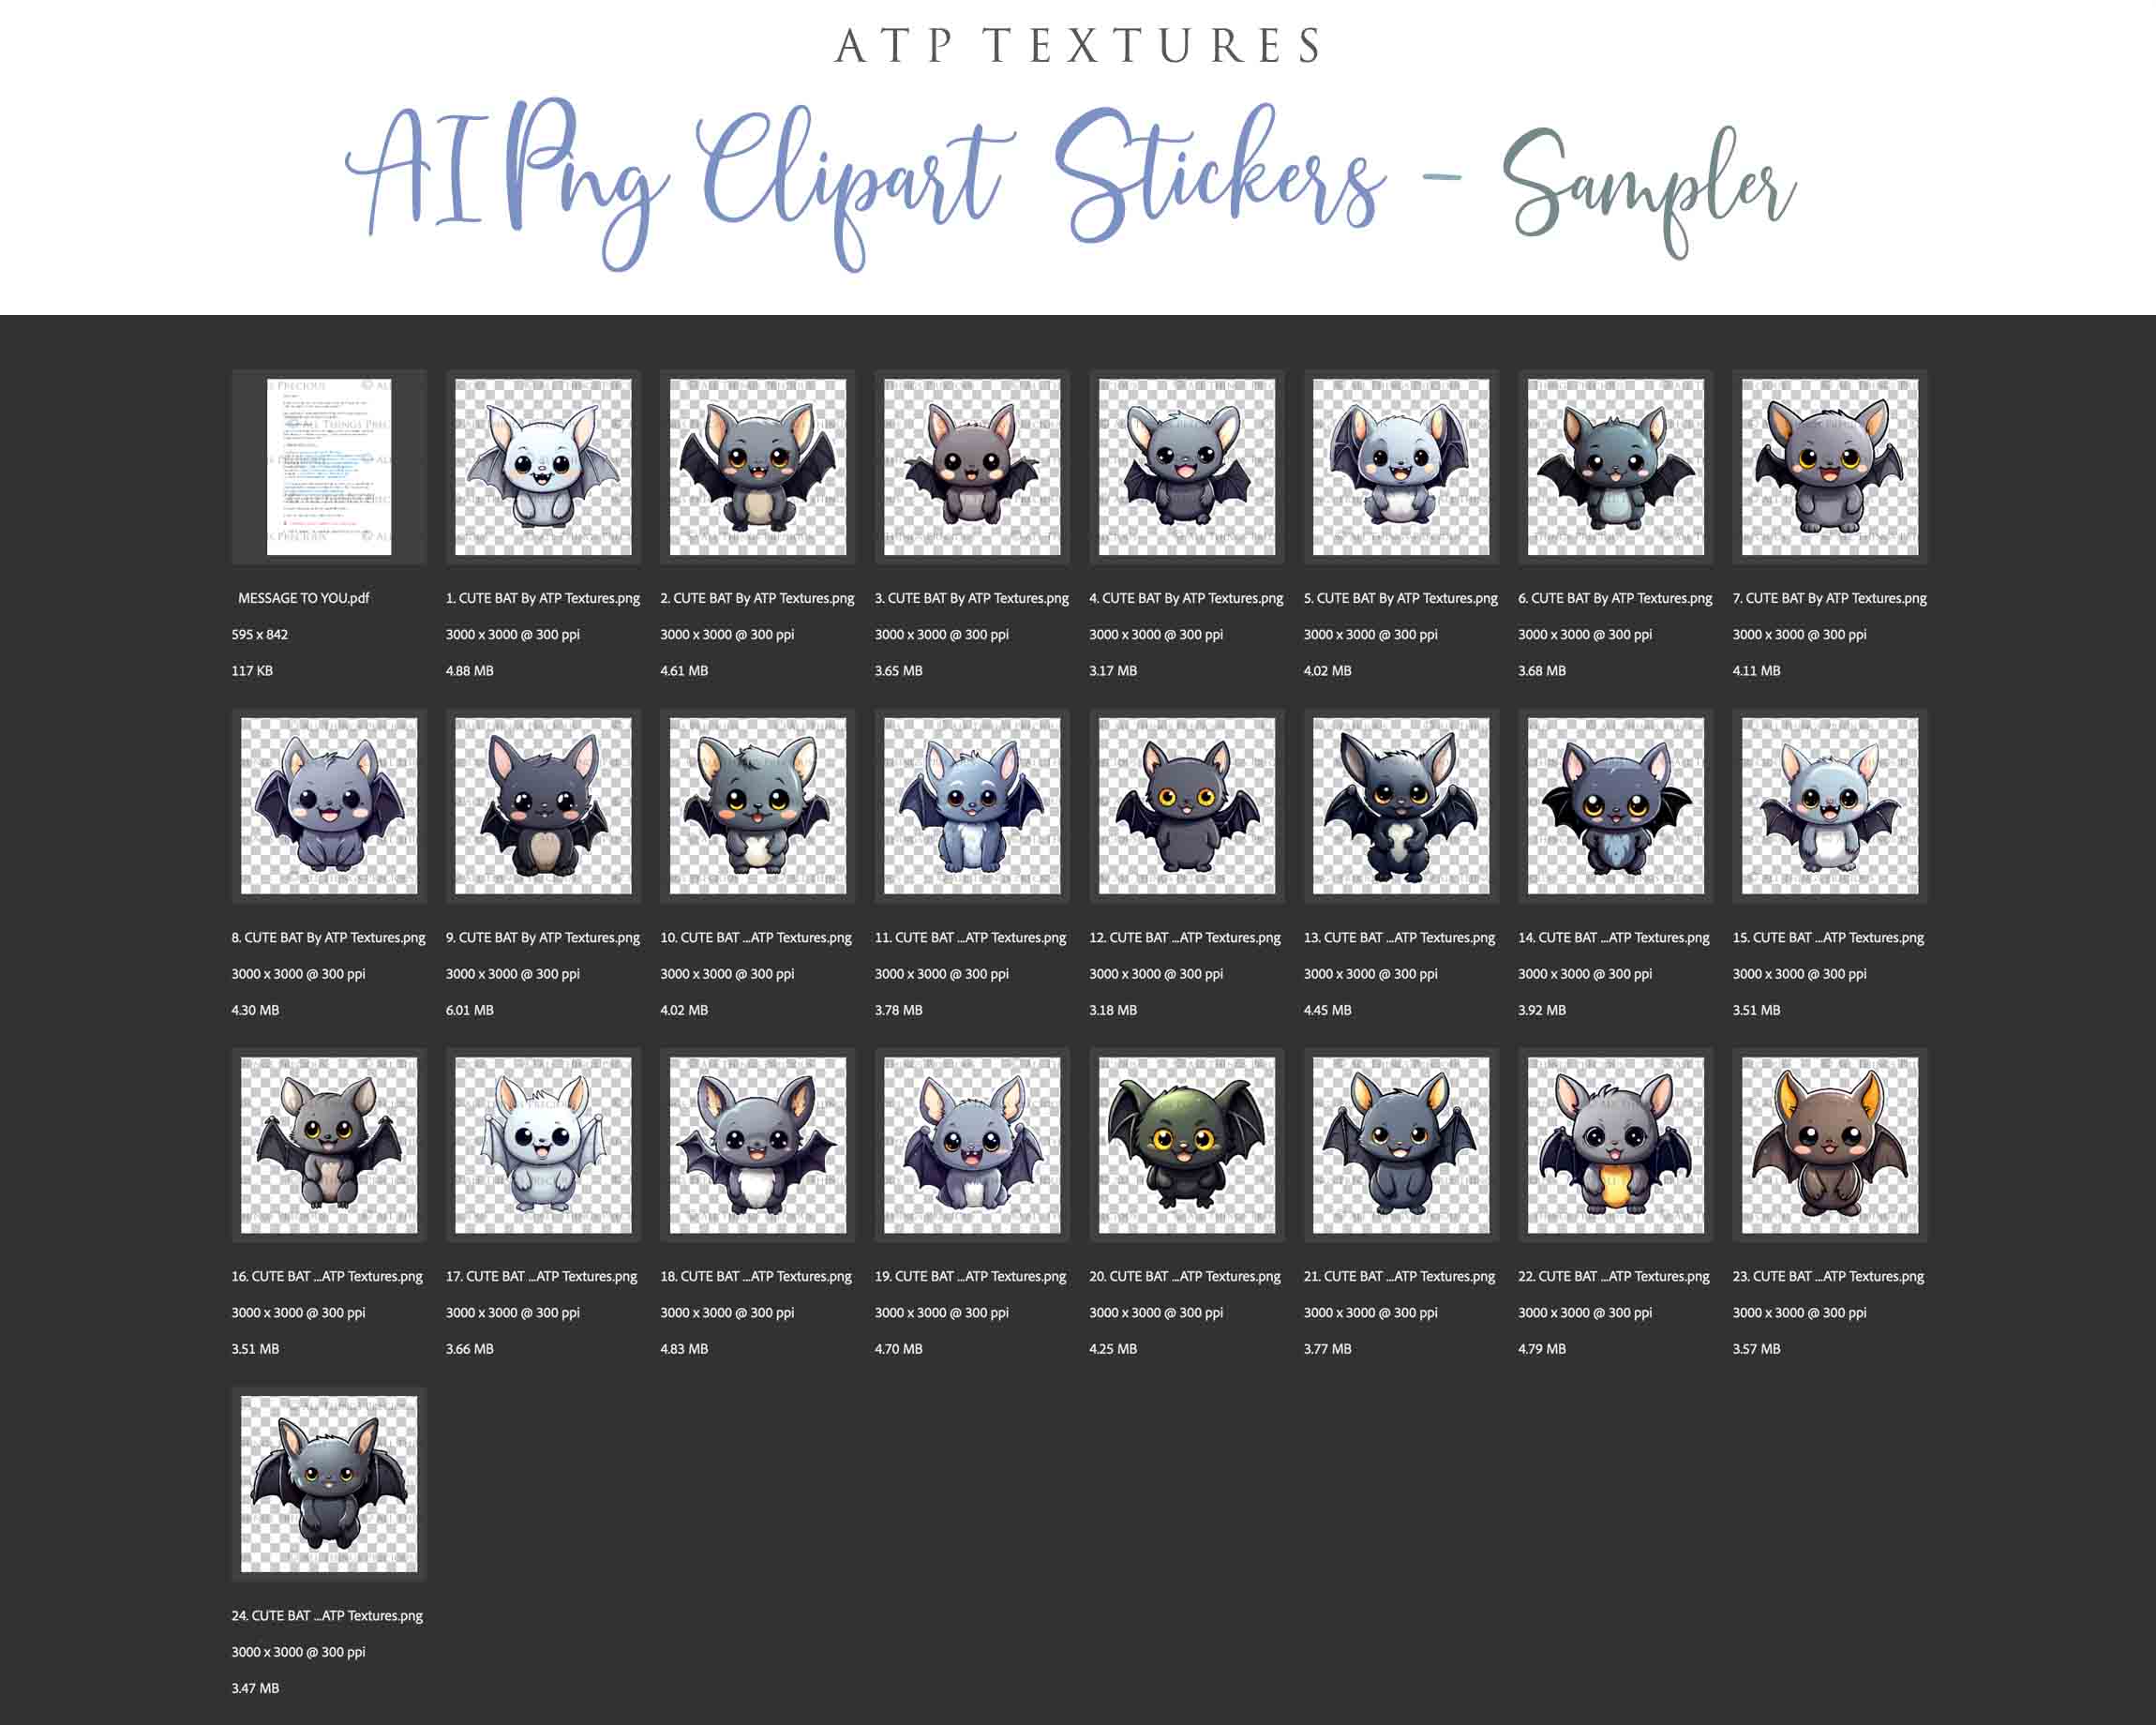 Halloween Day of the dead Cute Bat clipart. Perfect for scrapbooking and print. If you want to print your completed artwork, you can! PNG Transparent files, High resolution, 300dpi. AI Digital Art. - ATP Textures